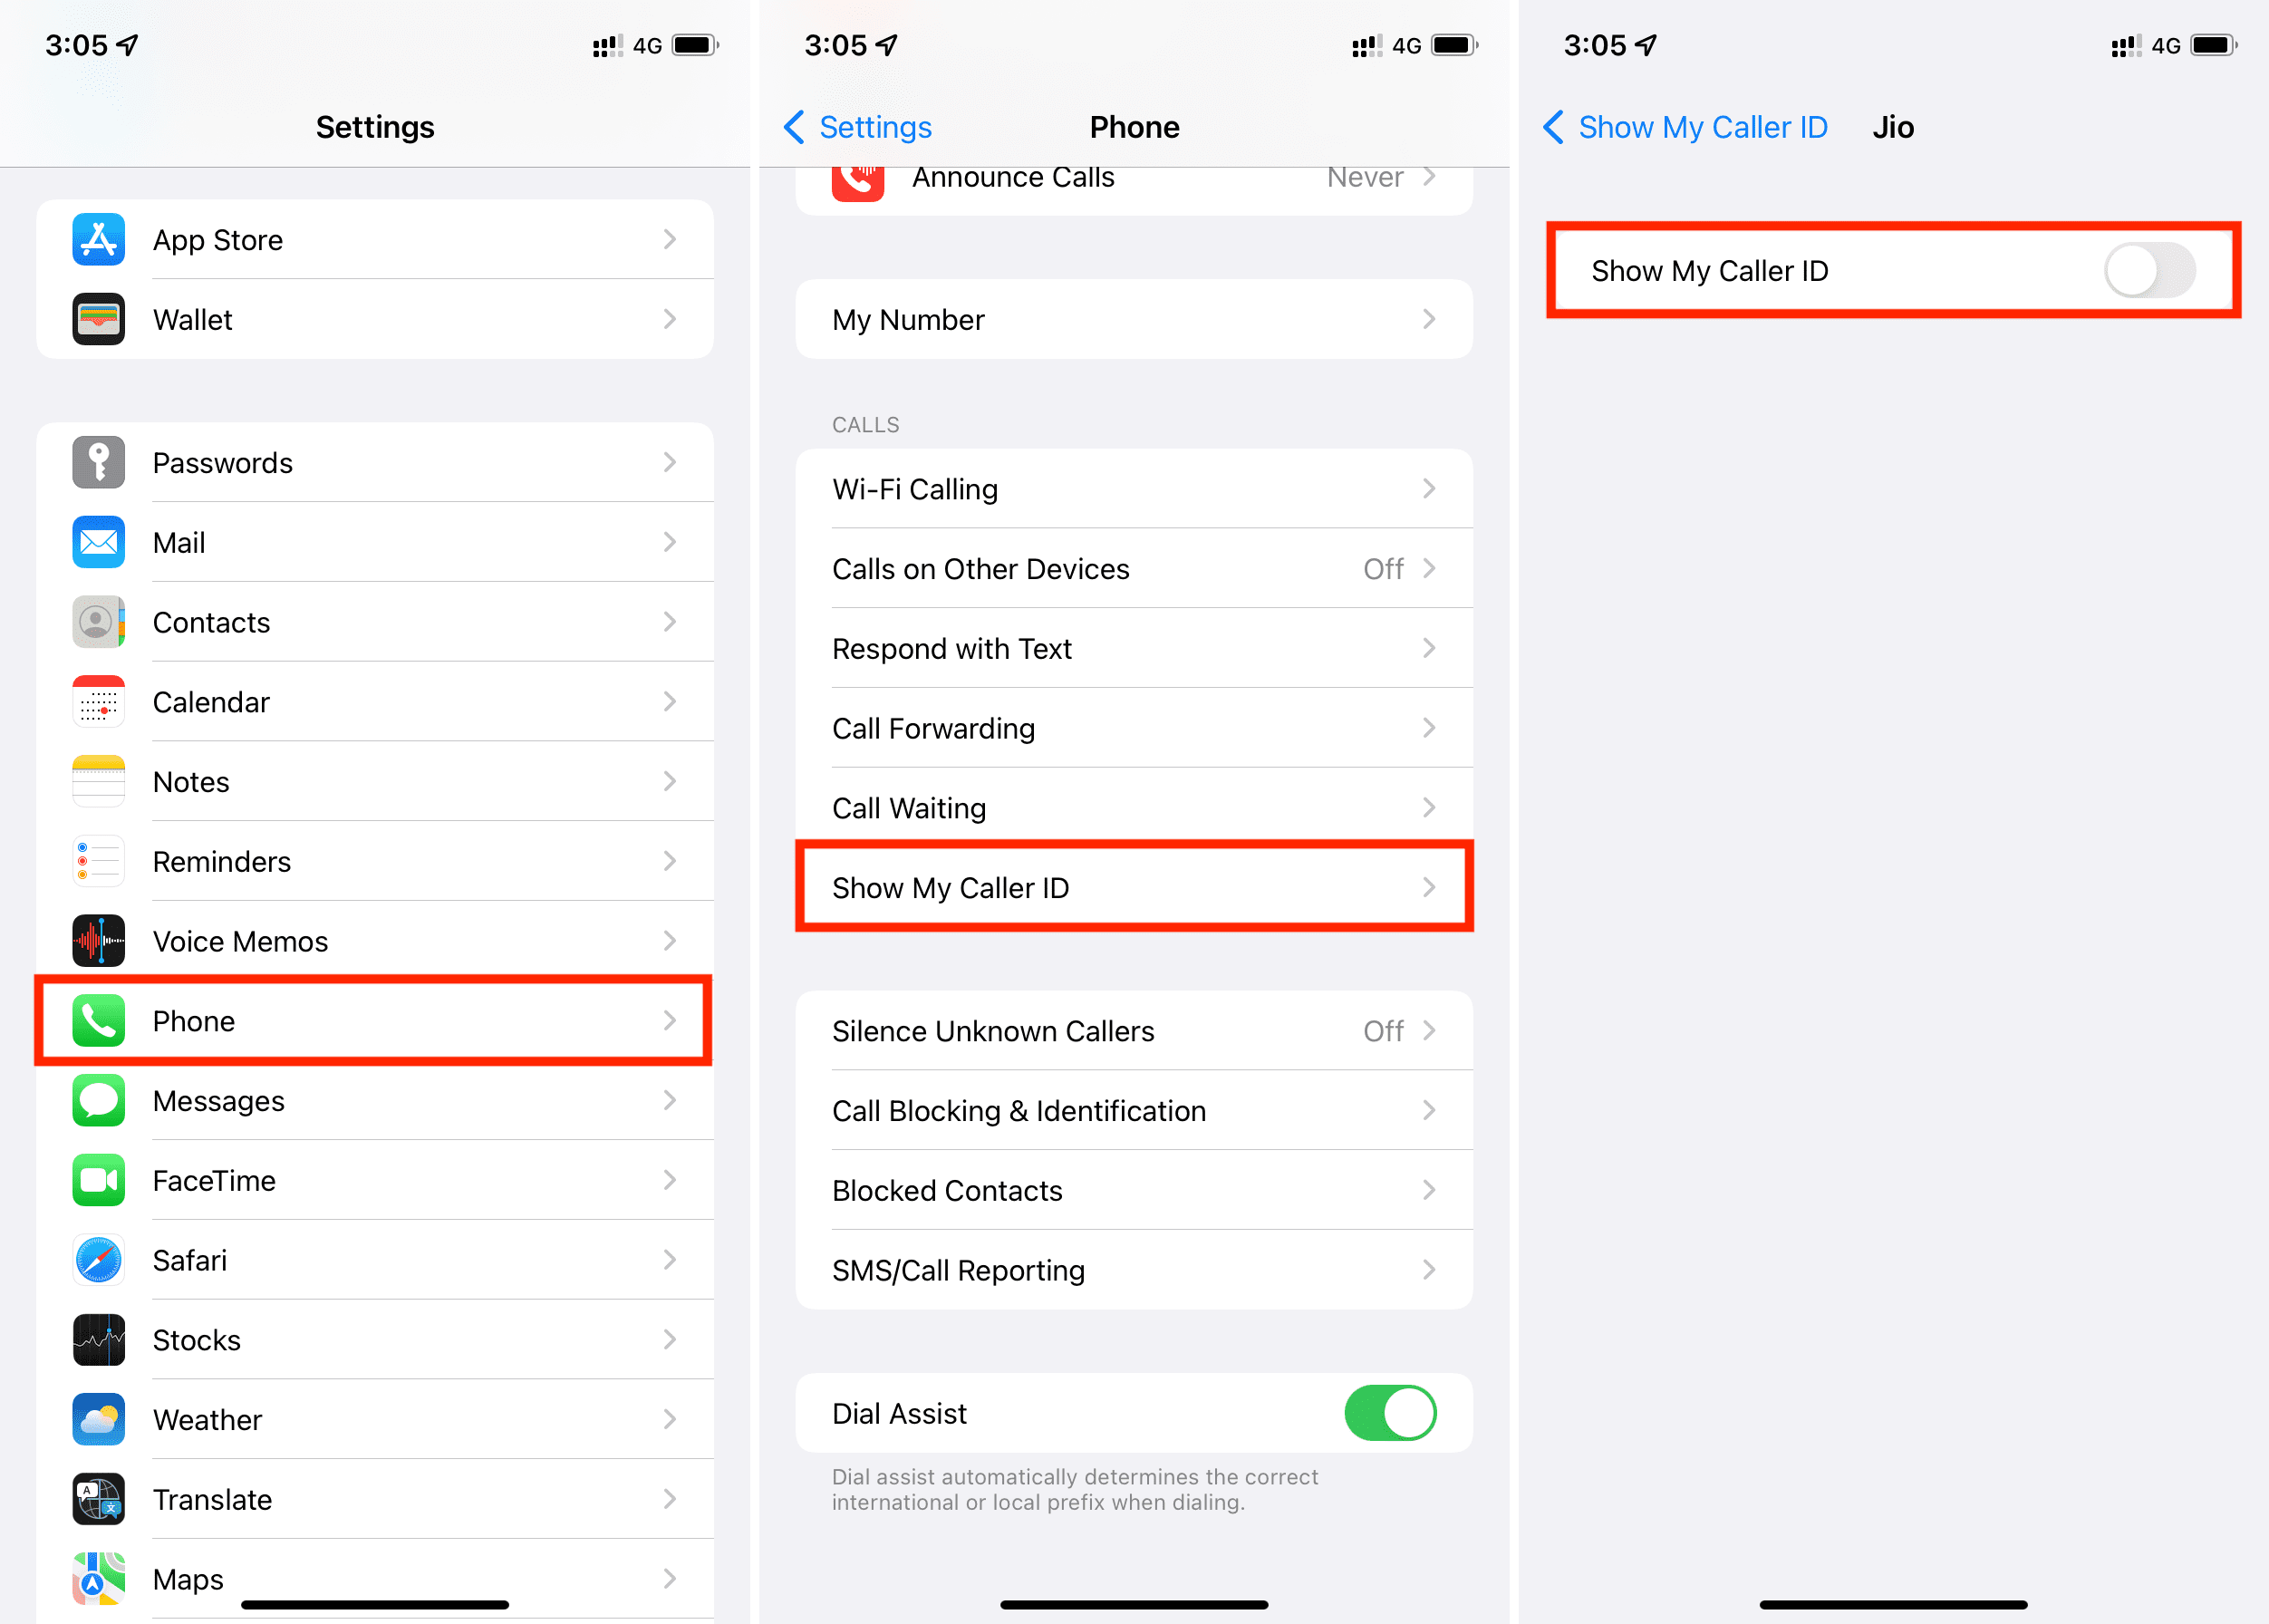 Steps to turn off "Show My Caller ID" from iPhone Settings to hide caller ID